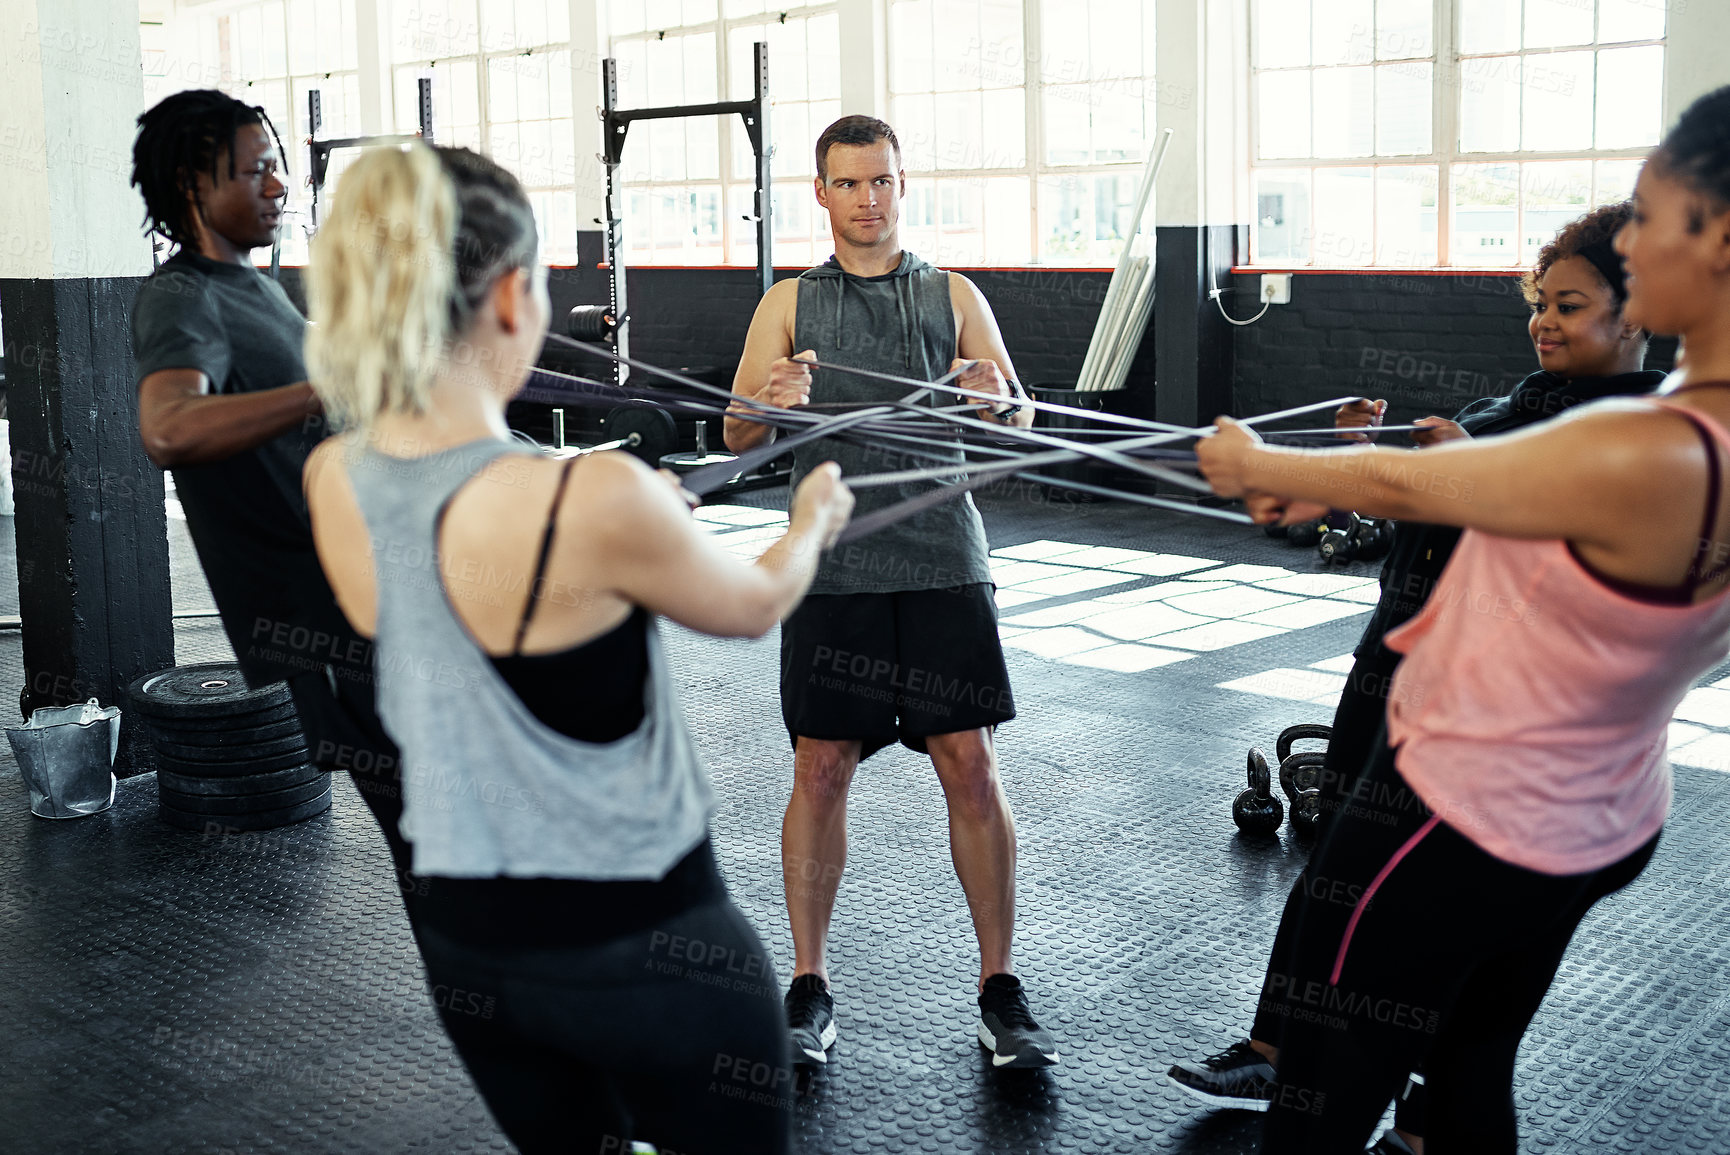 Buy stock photo Shot of a fitness group working out with resistance bands in their session at the gym